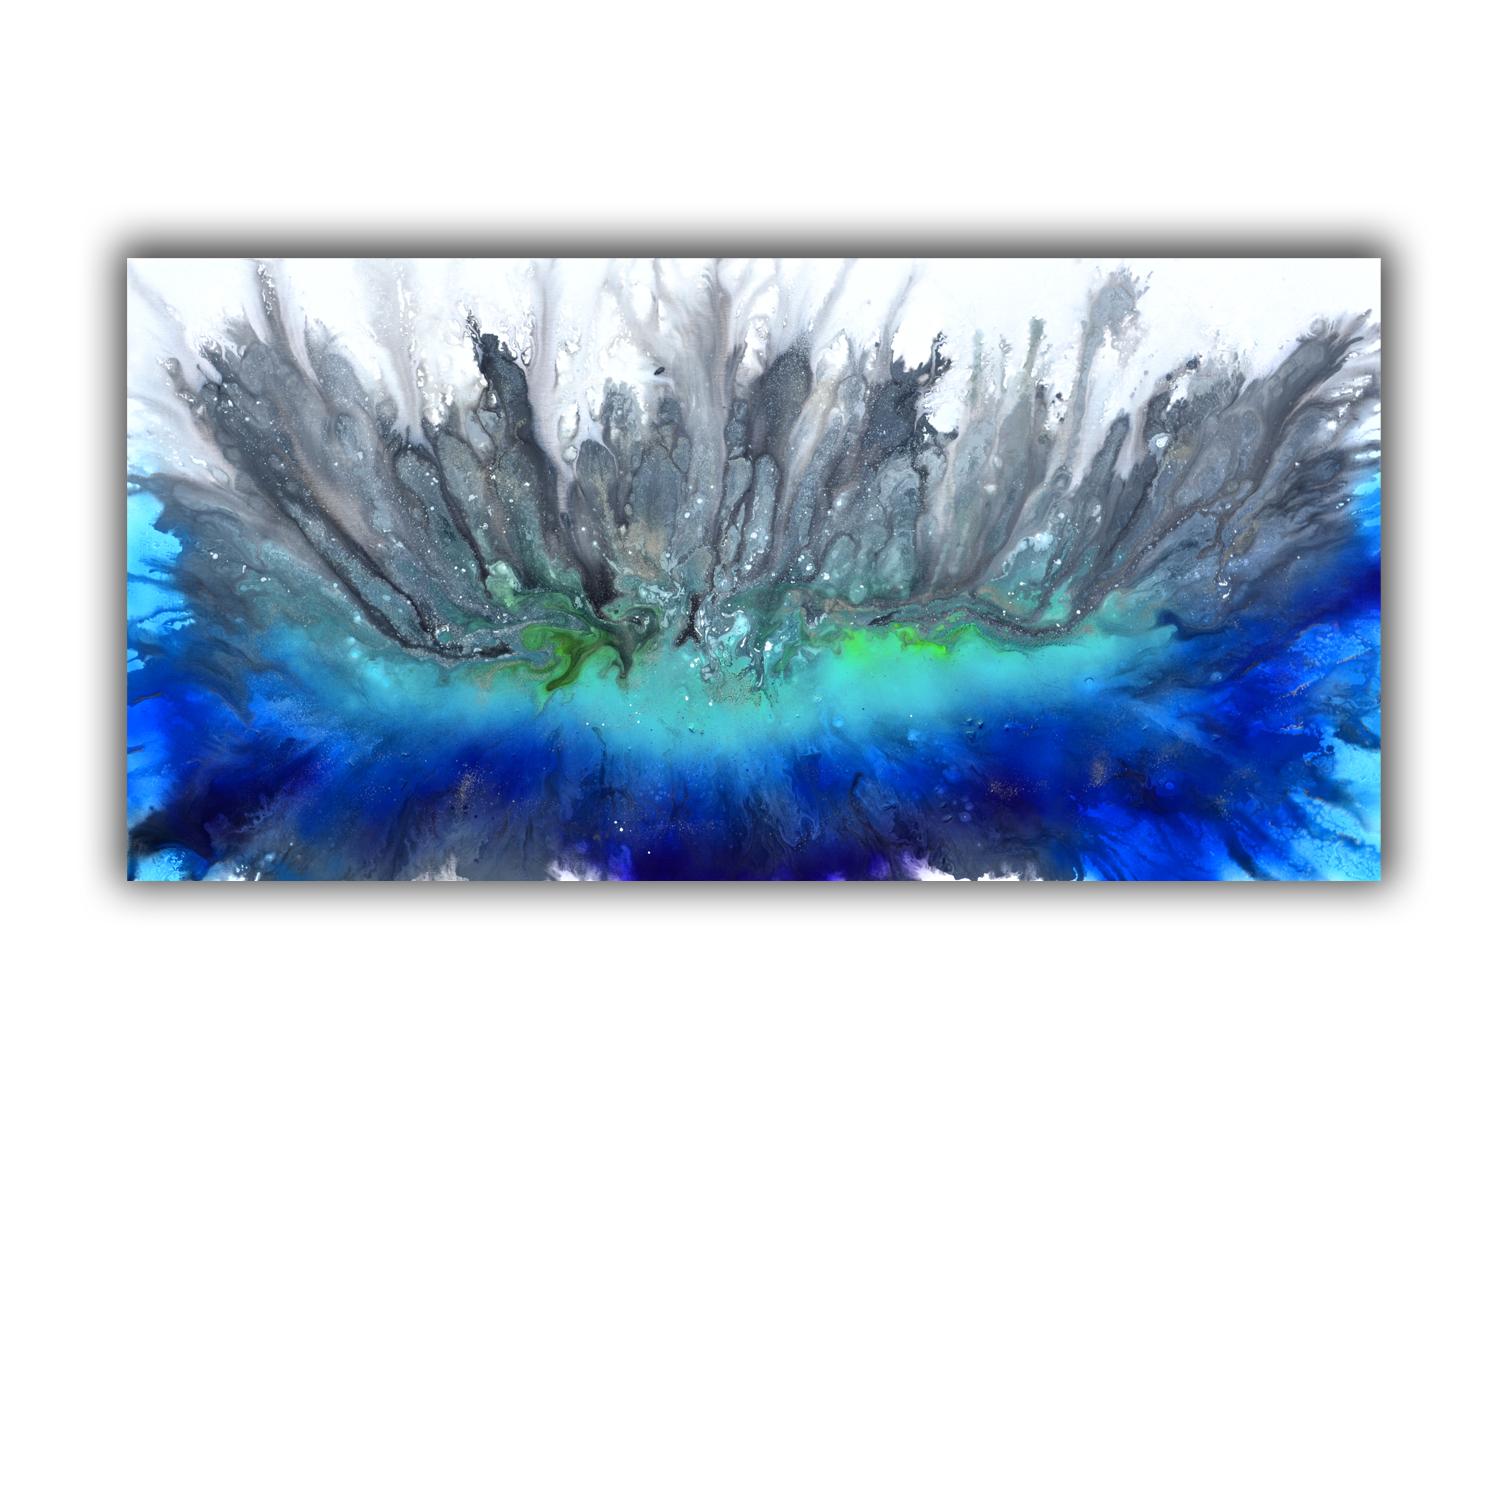 Astral Love XXVII - Large Abstract Gray and Blue Painting is a spectacular huge original abstract artwork from the Astral Love serie.

This artwork is shipping UNMOUNTED and ROLLED UP in a tube. International shipping prices have risen 50%, making